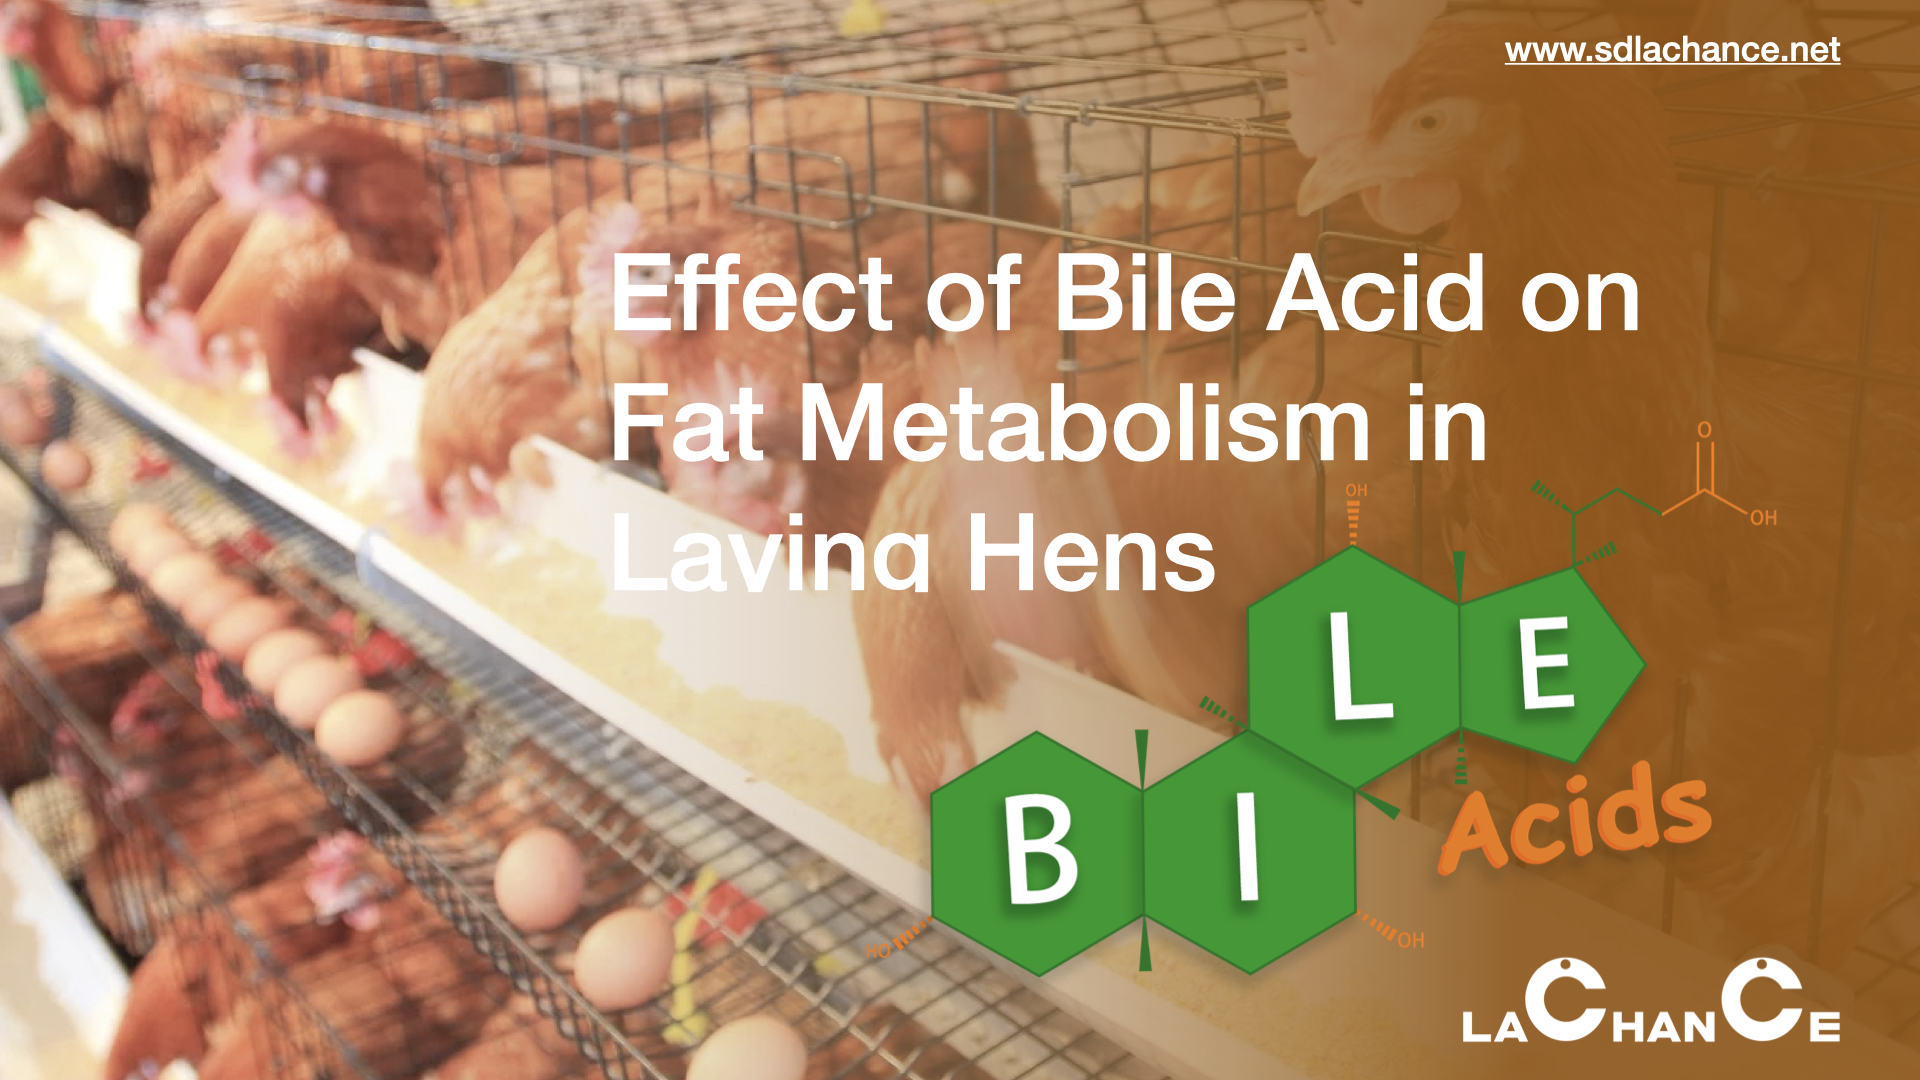 Effect of Bile Acid on Fat Metabolism in Laying Hens